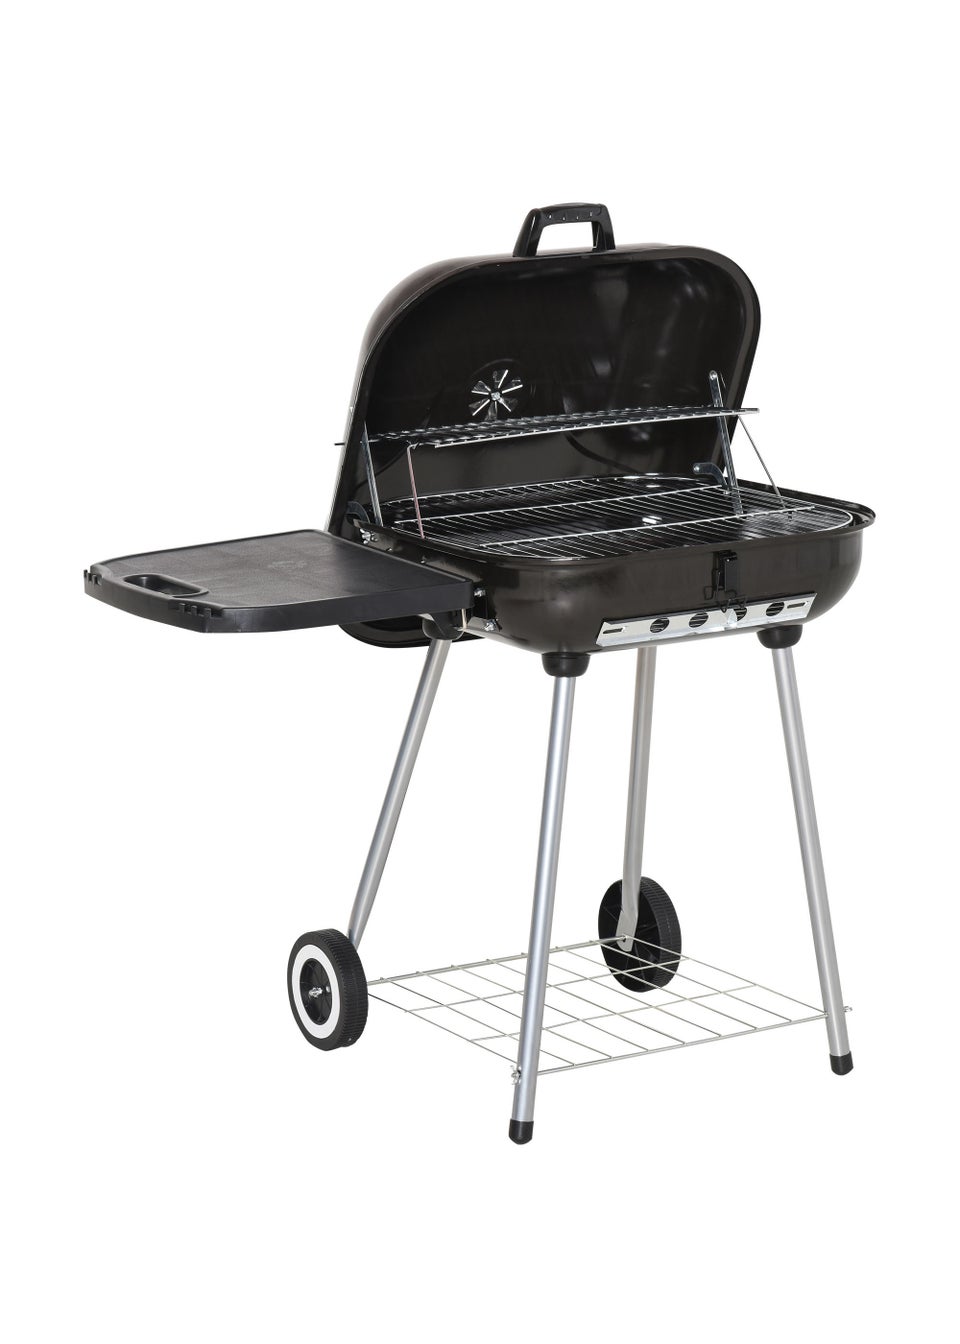 Outsunny Portable Charcoal Steel Grill Barbecue (96cm x 60cm x 83cm)